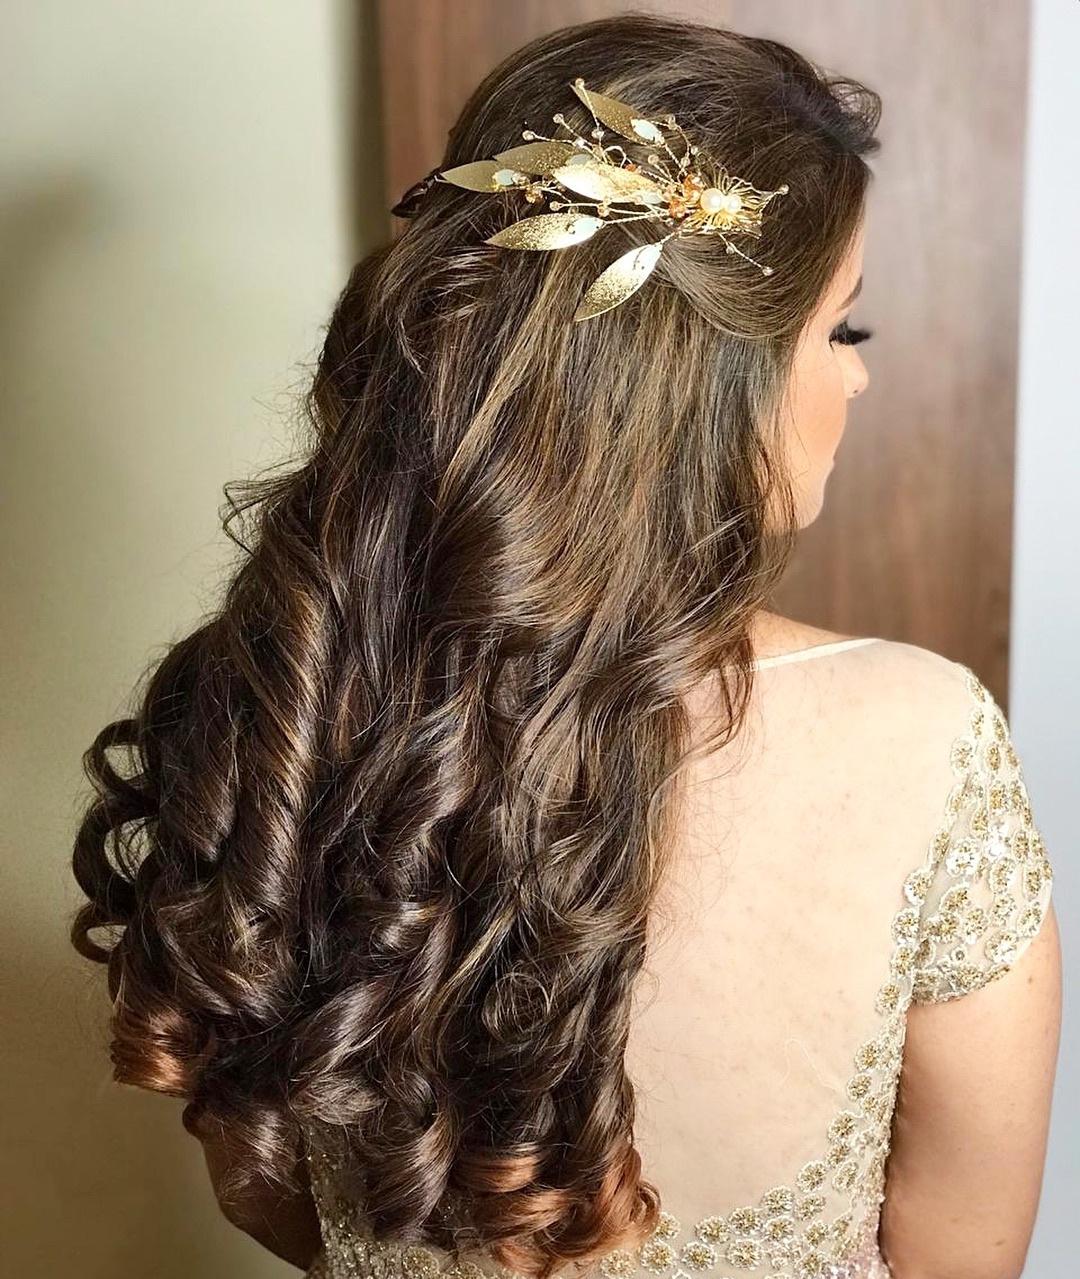 16 Beautiful And Trendy Hair Accessories For Brides: From 'Gota-Patti'  'Parandi' To Elegant 'Gajras'